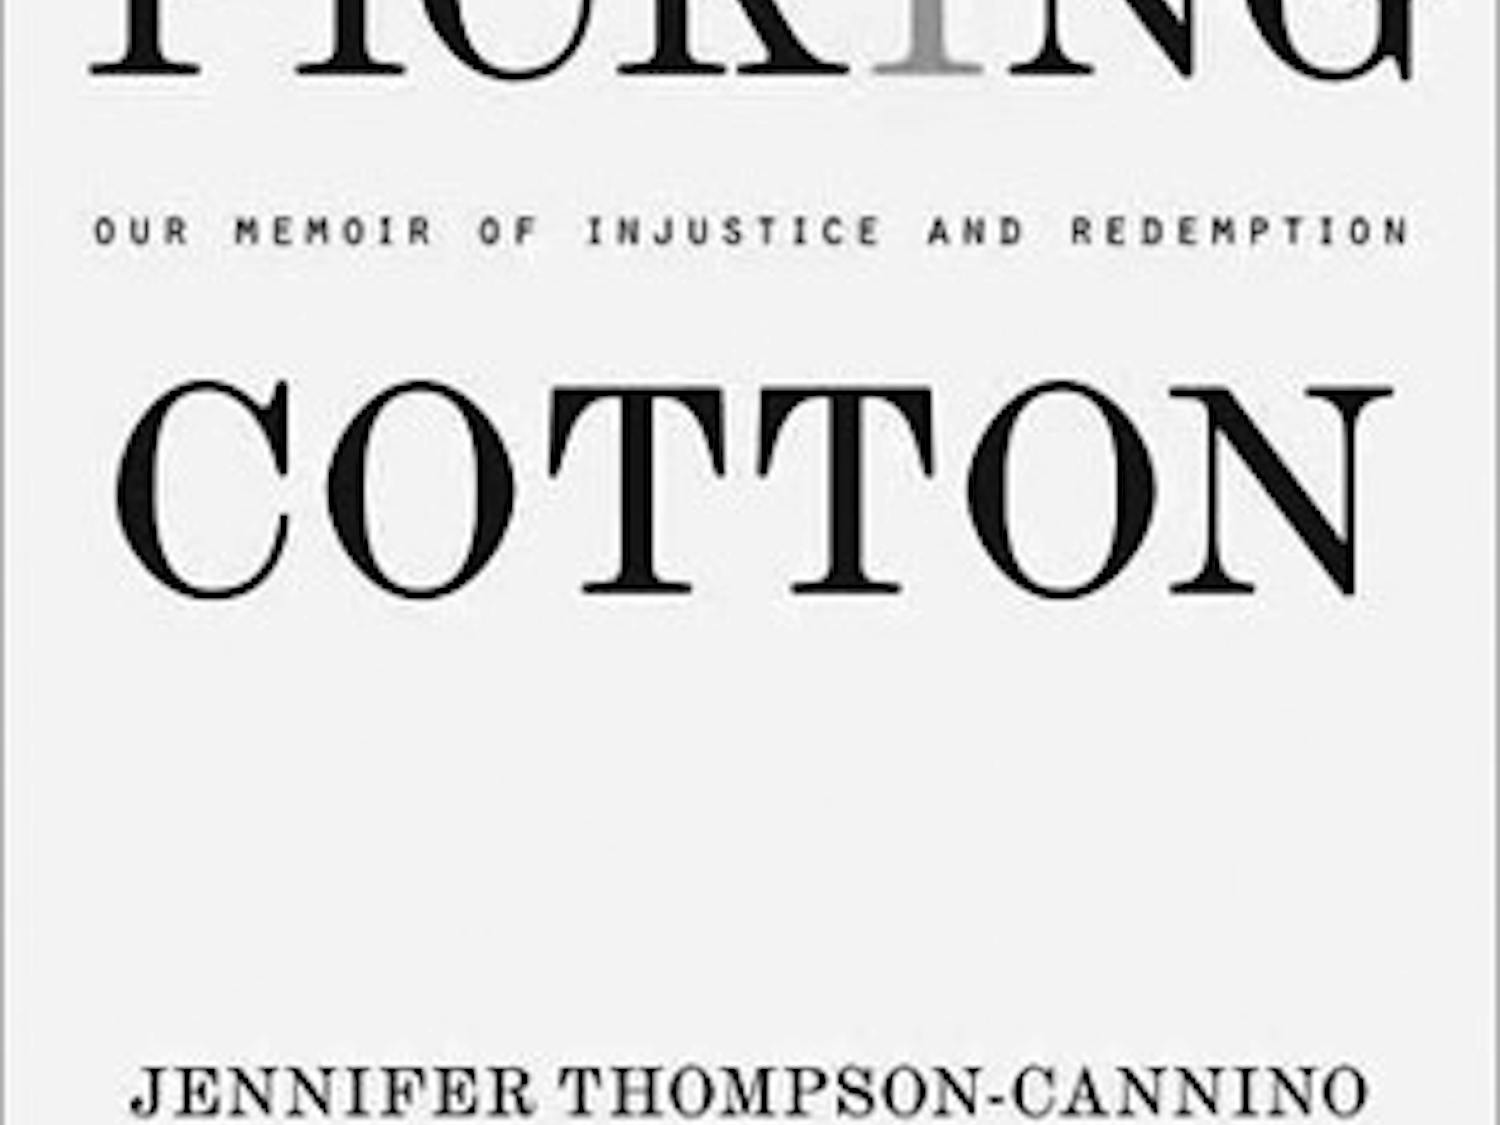 Picking Cotton, a memoir by Jennifer Thompson-Cannino and Ronald Cotton, is the 2010  summer reading book.